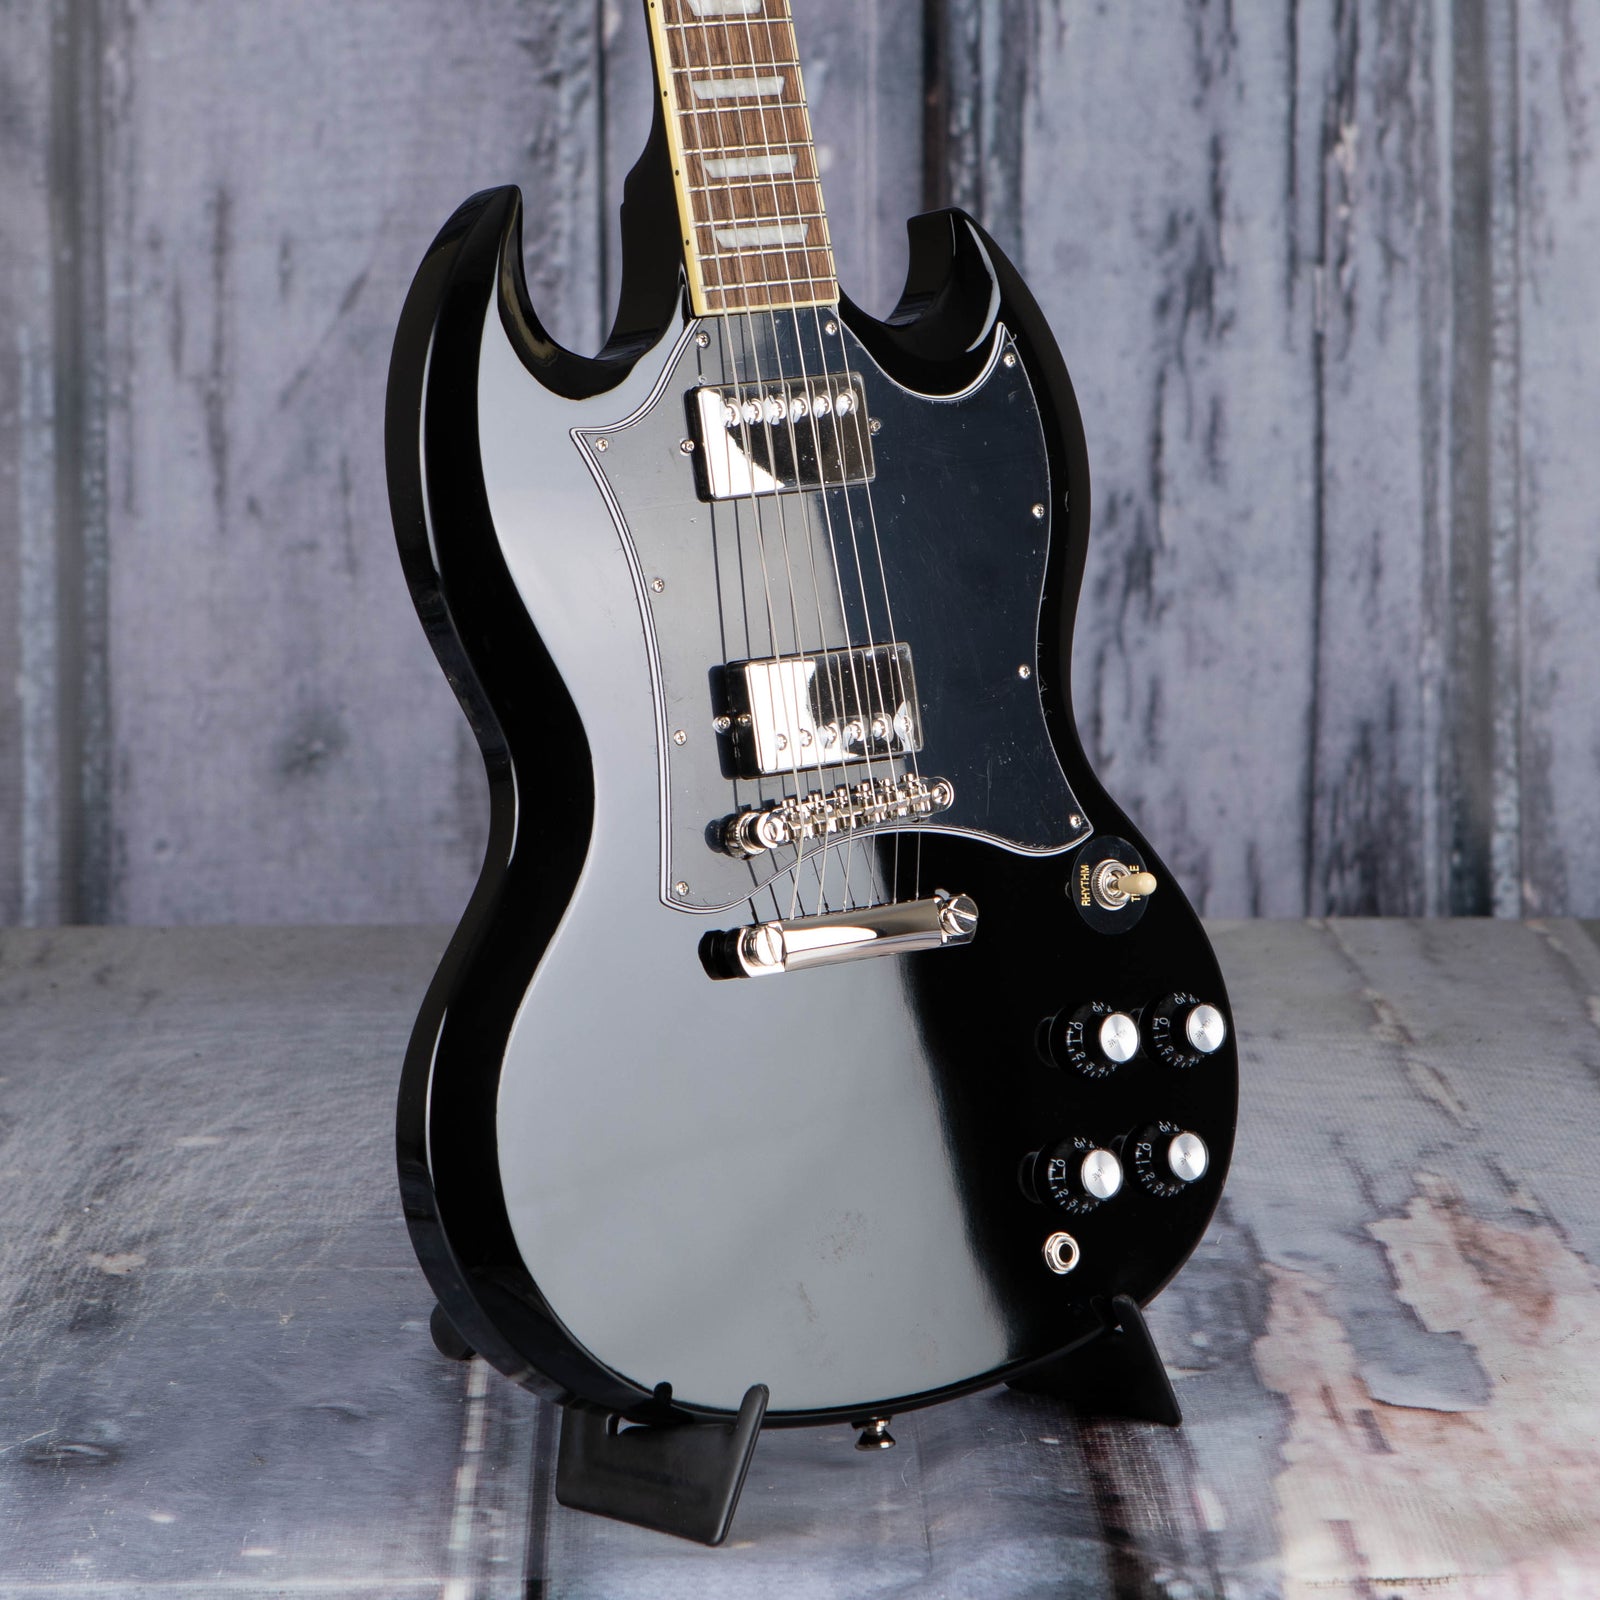 Epiphone SG Standard, Ebony | For Sale | Replay Guitar Exchange